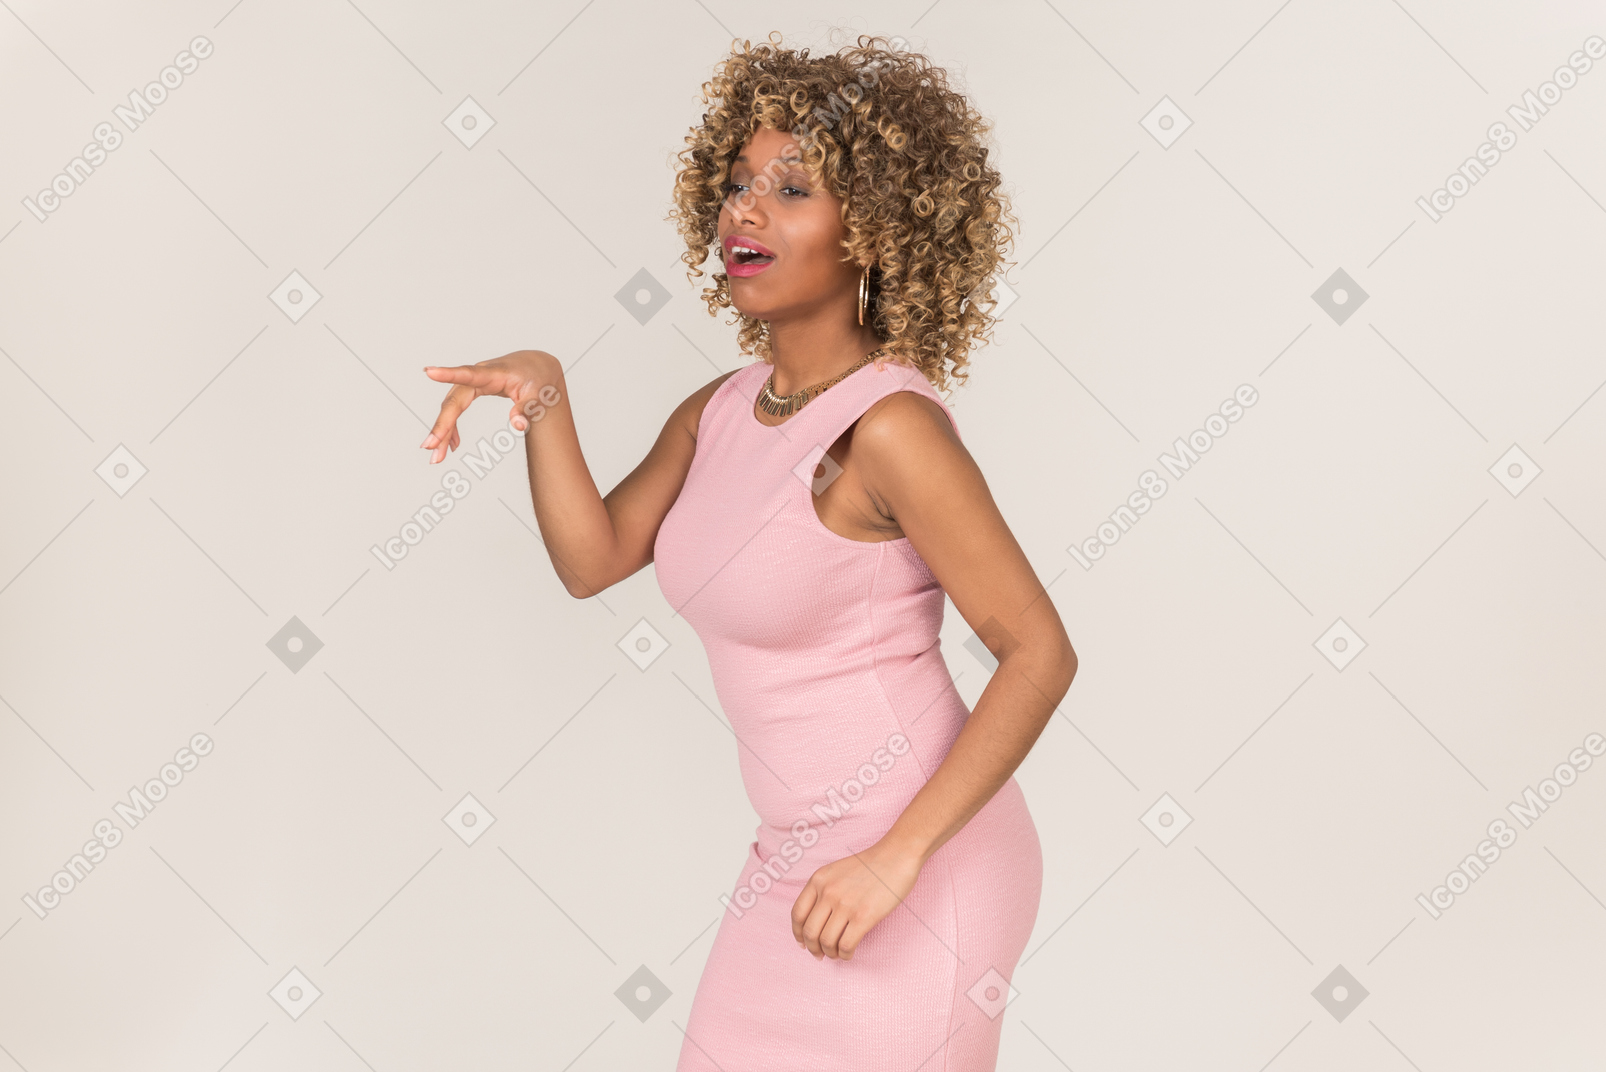 A woman in pink dress pointing at something